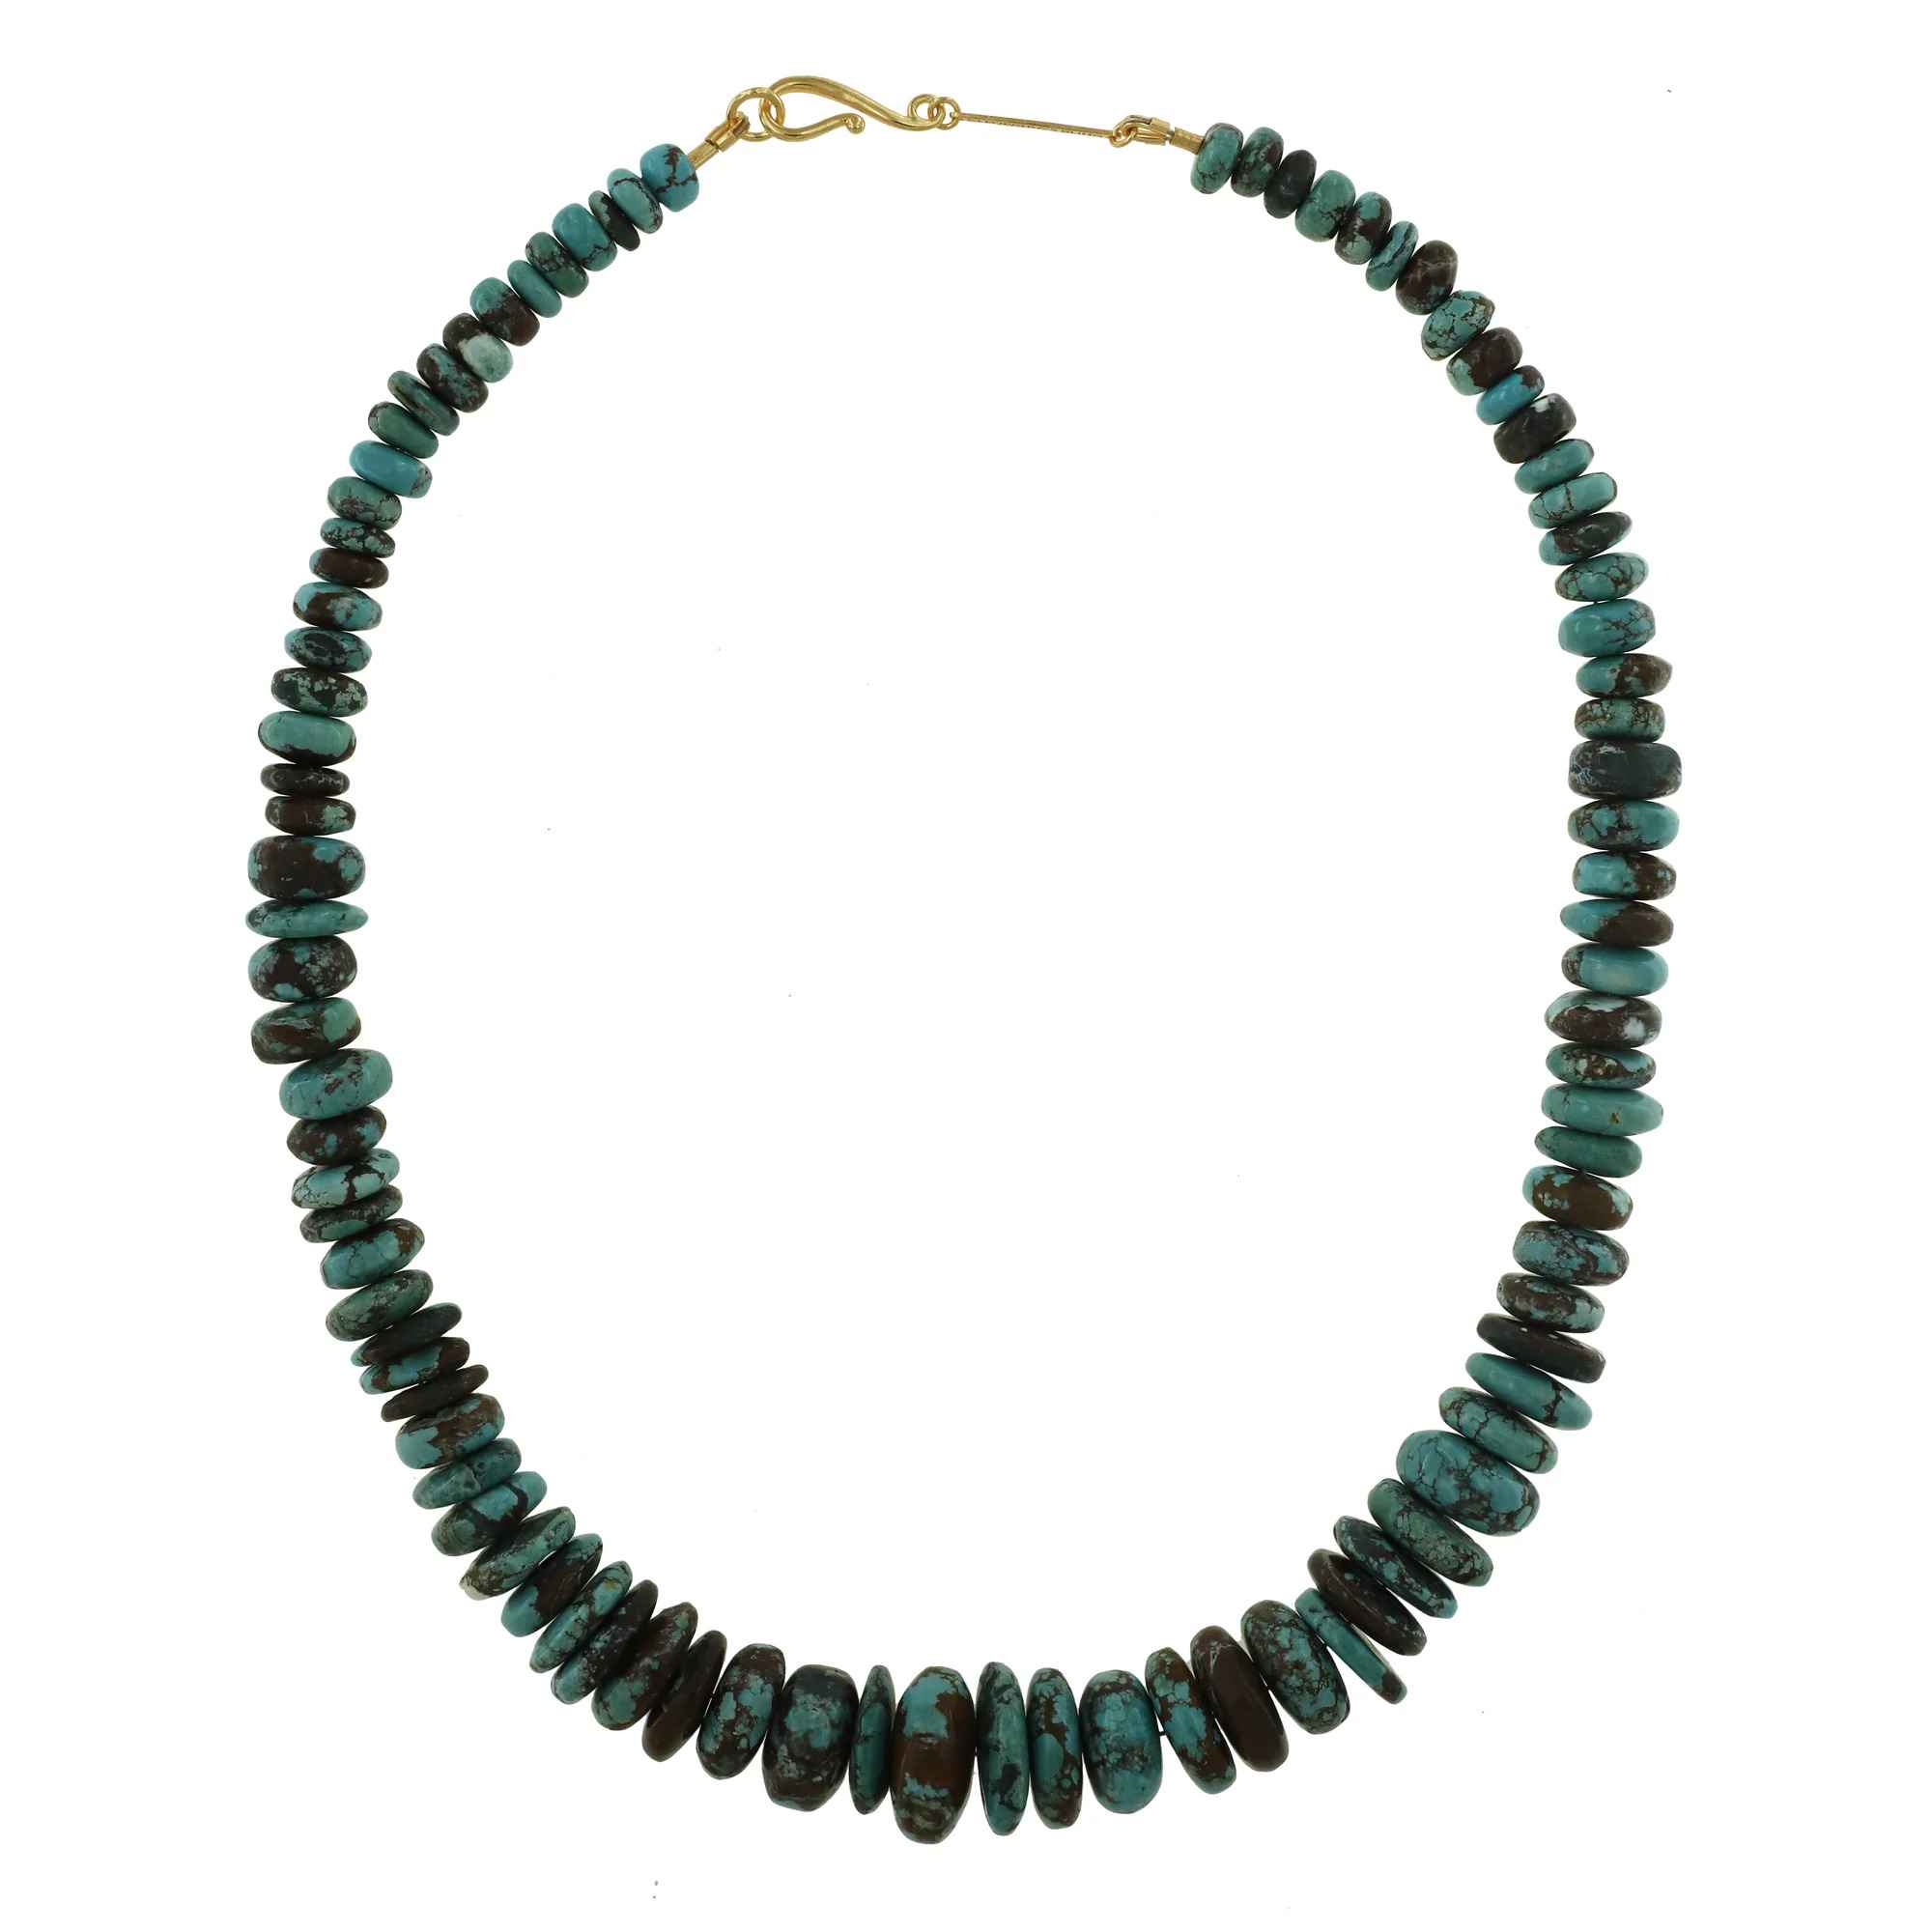 CO.NK.132 Necklace – 18K Gold Plated